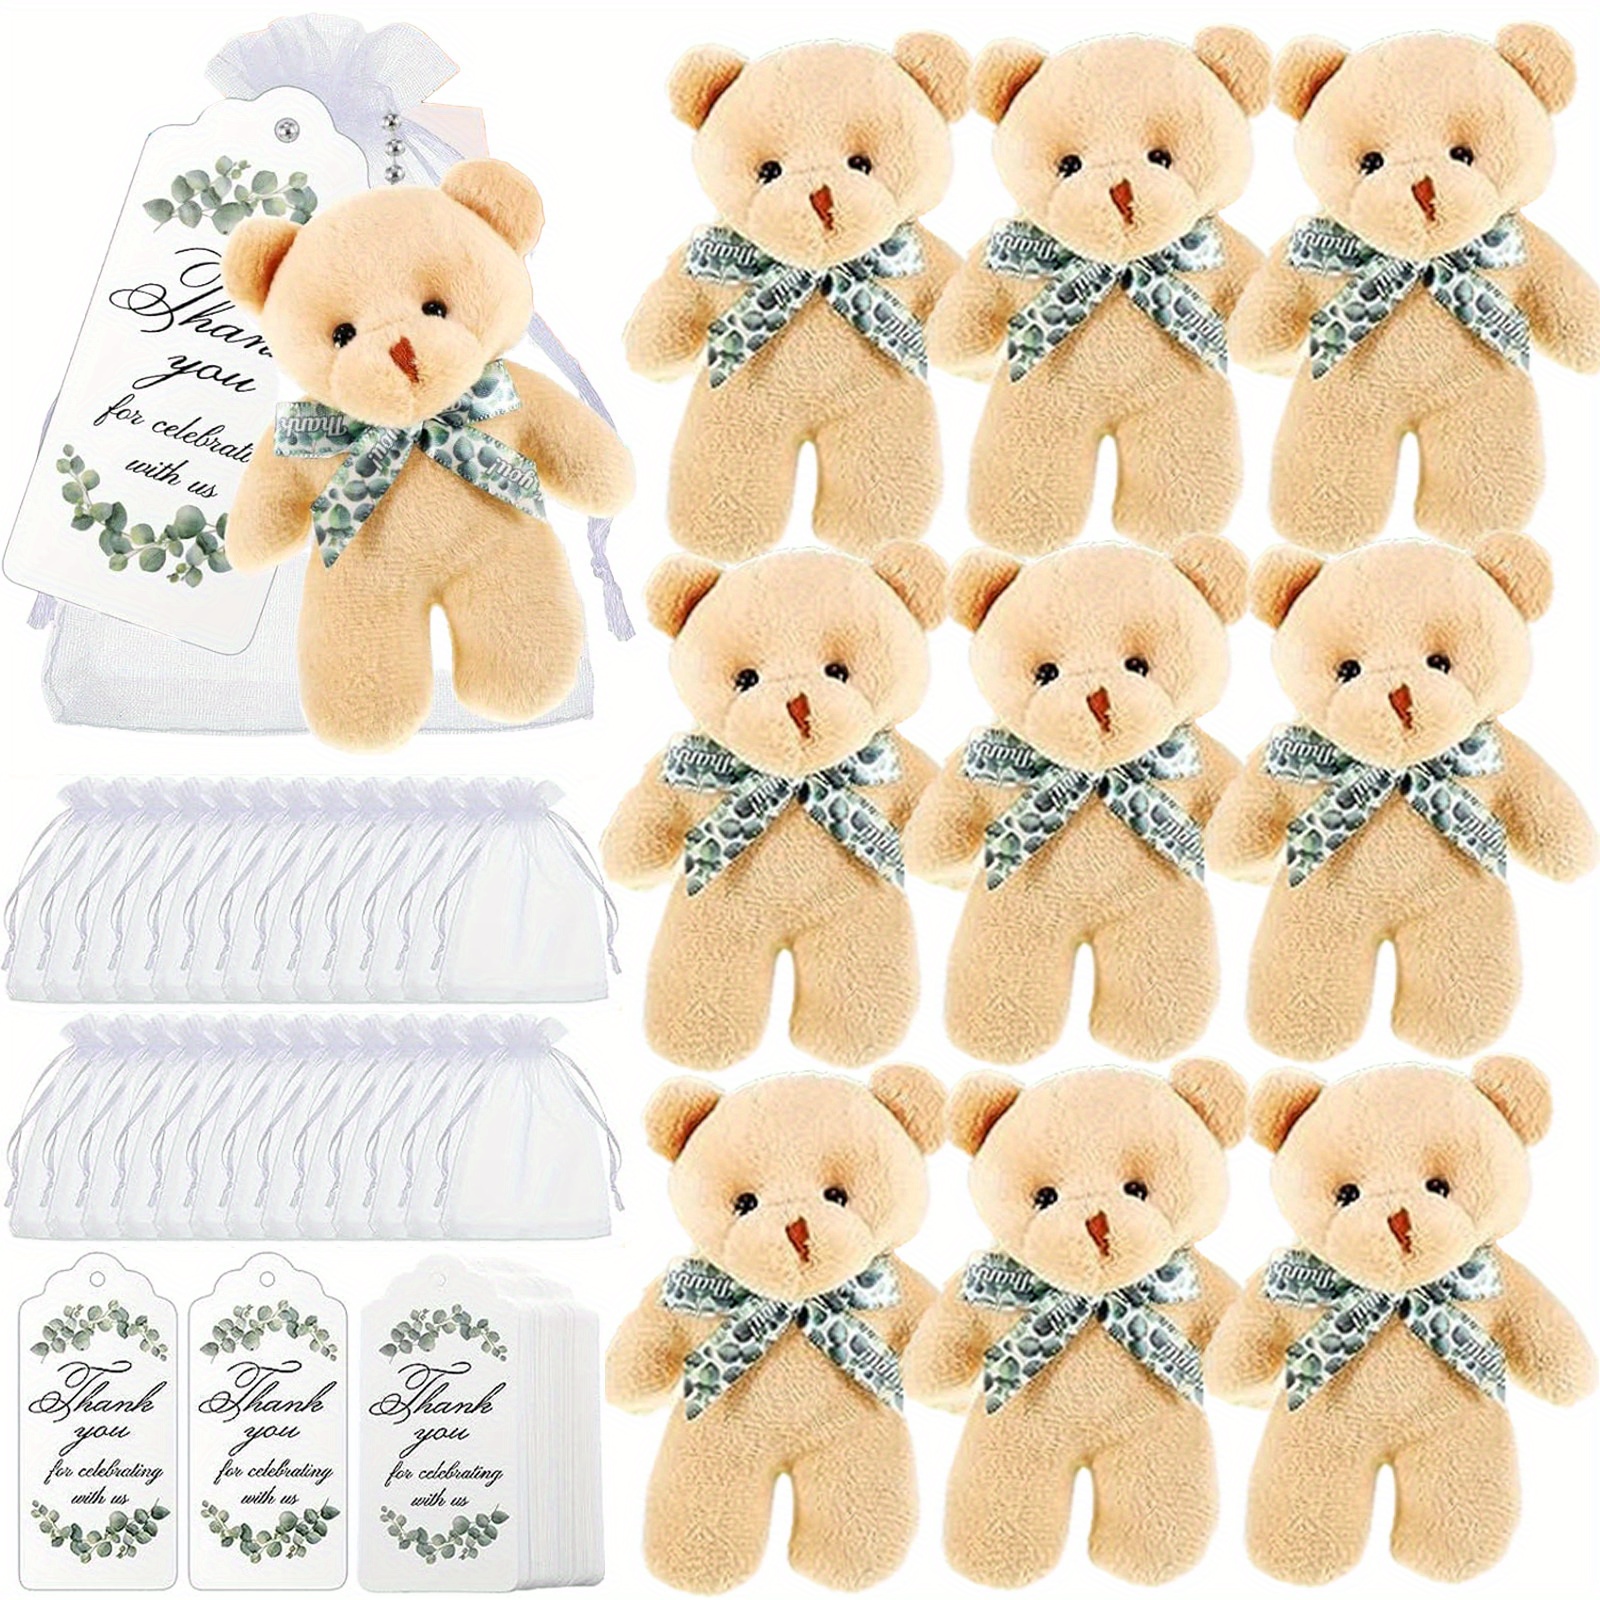 

10 Sets, Baby Shower Small Tiny Plush Bear Bulk 4.72 Inch Mini Stuffed Animals Small Bear Party Favors With Thank You Tags And Mesh Bags For Diy Keychain Birthday Baby Shower